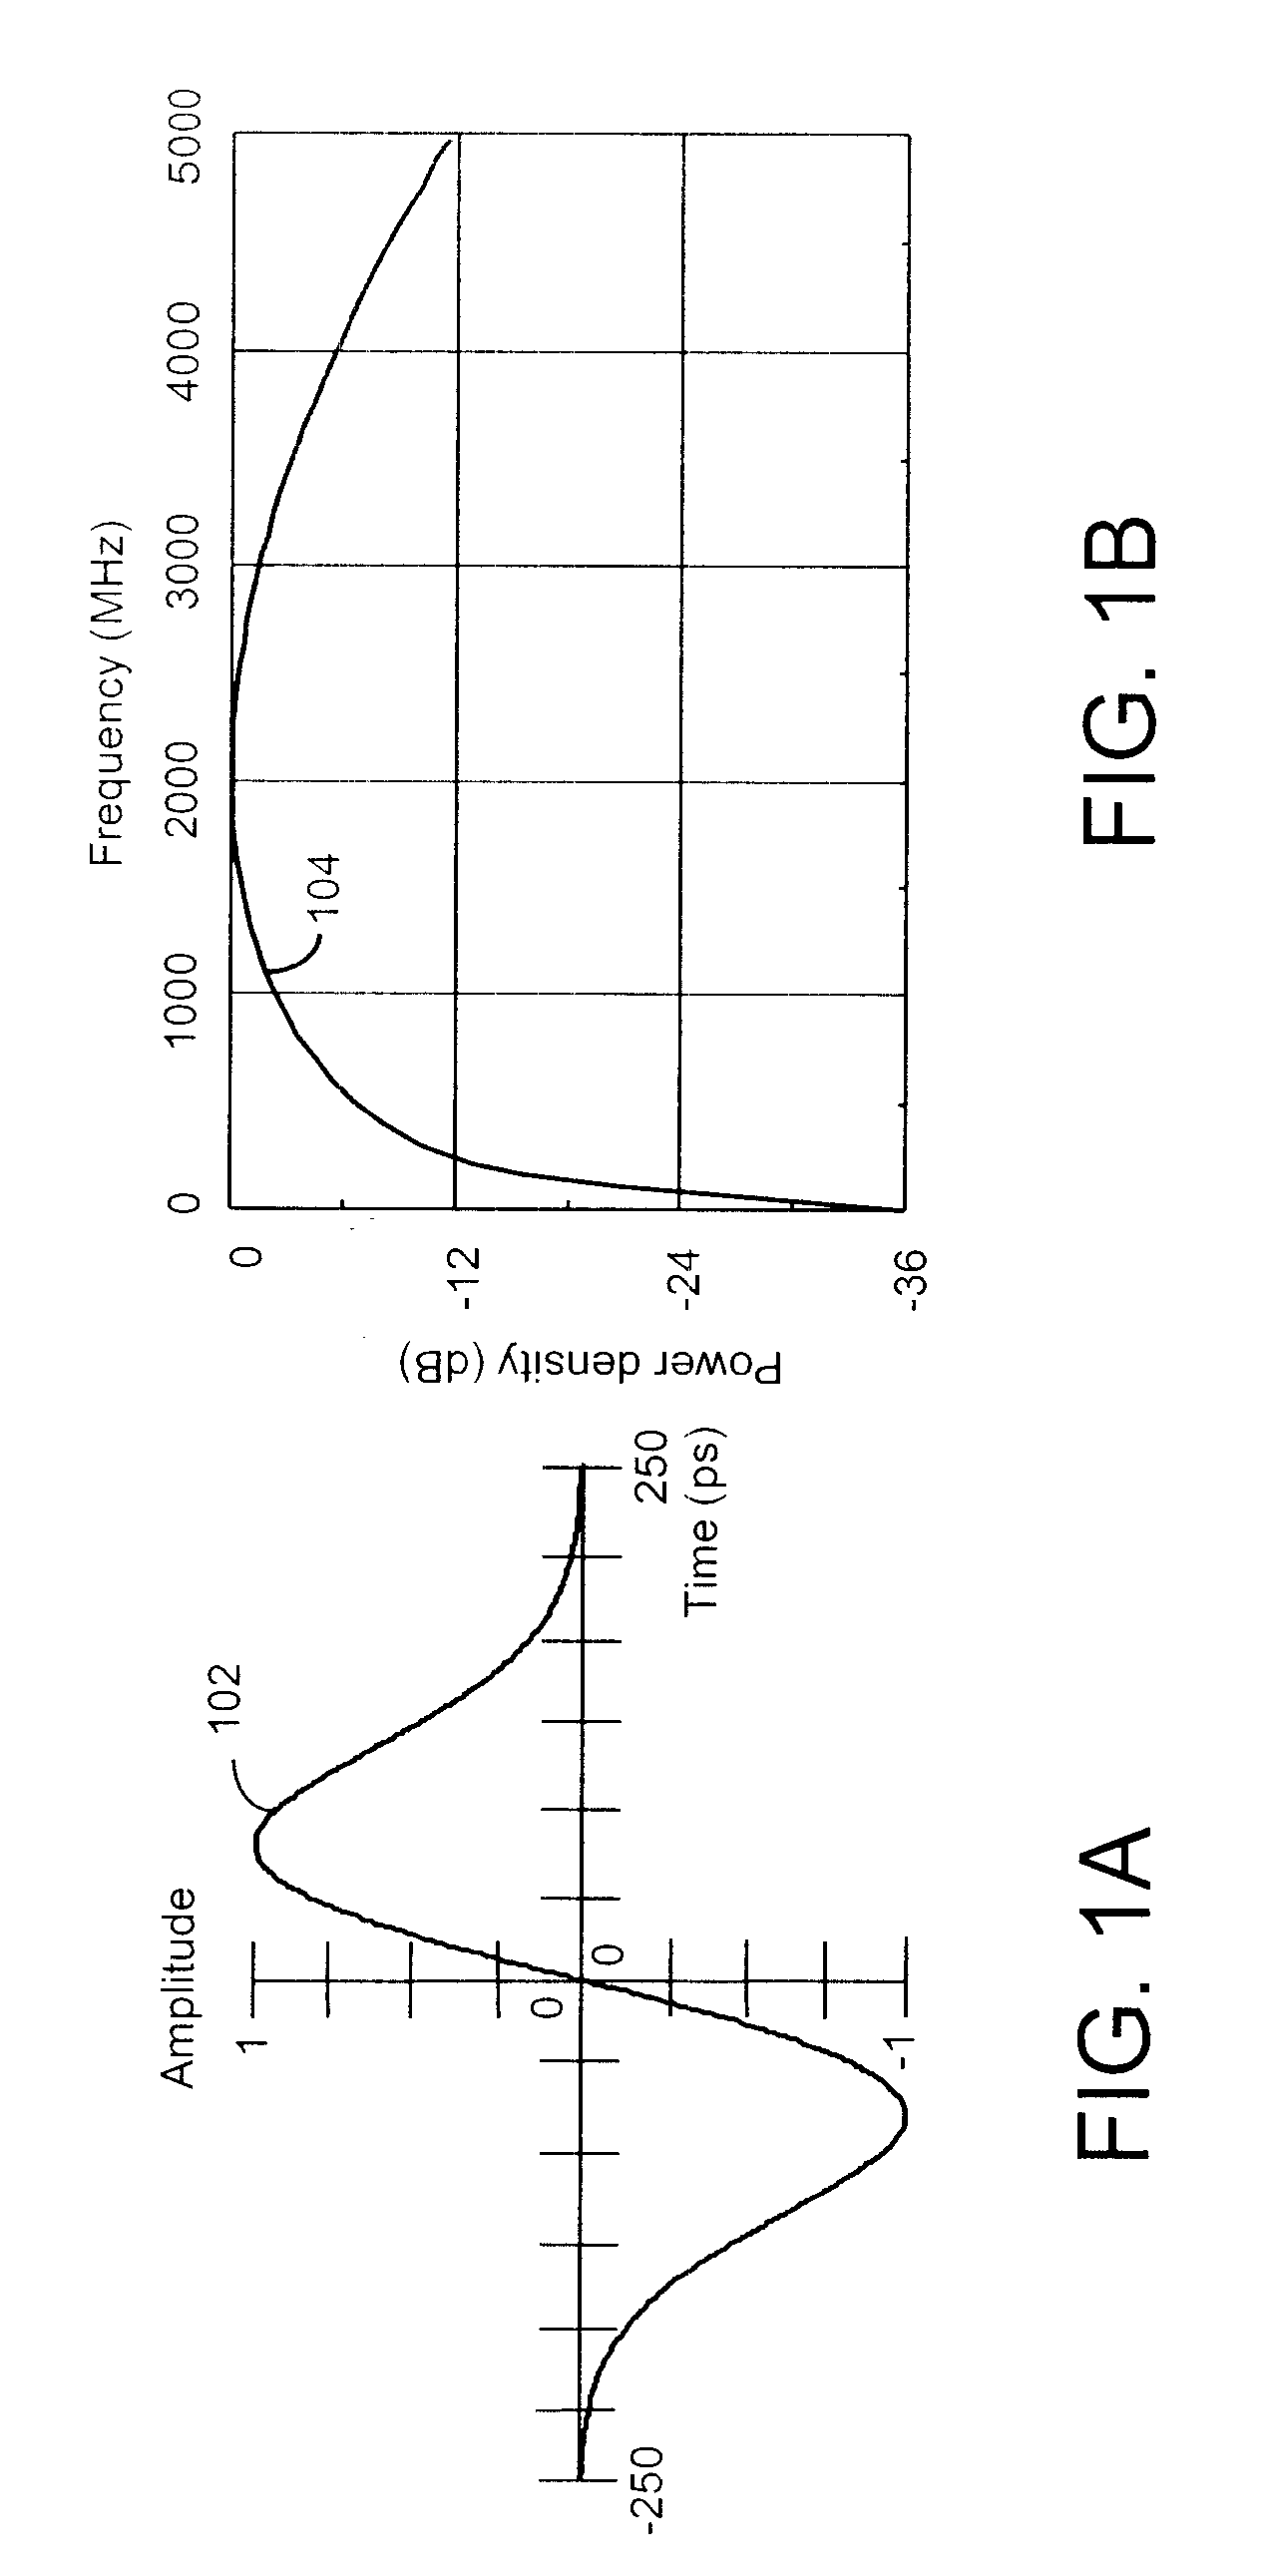 System and method for using impulse radio technology to track and monitor animals